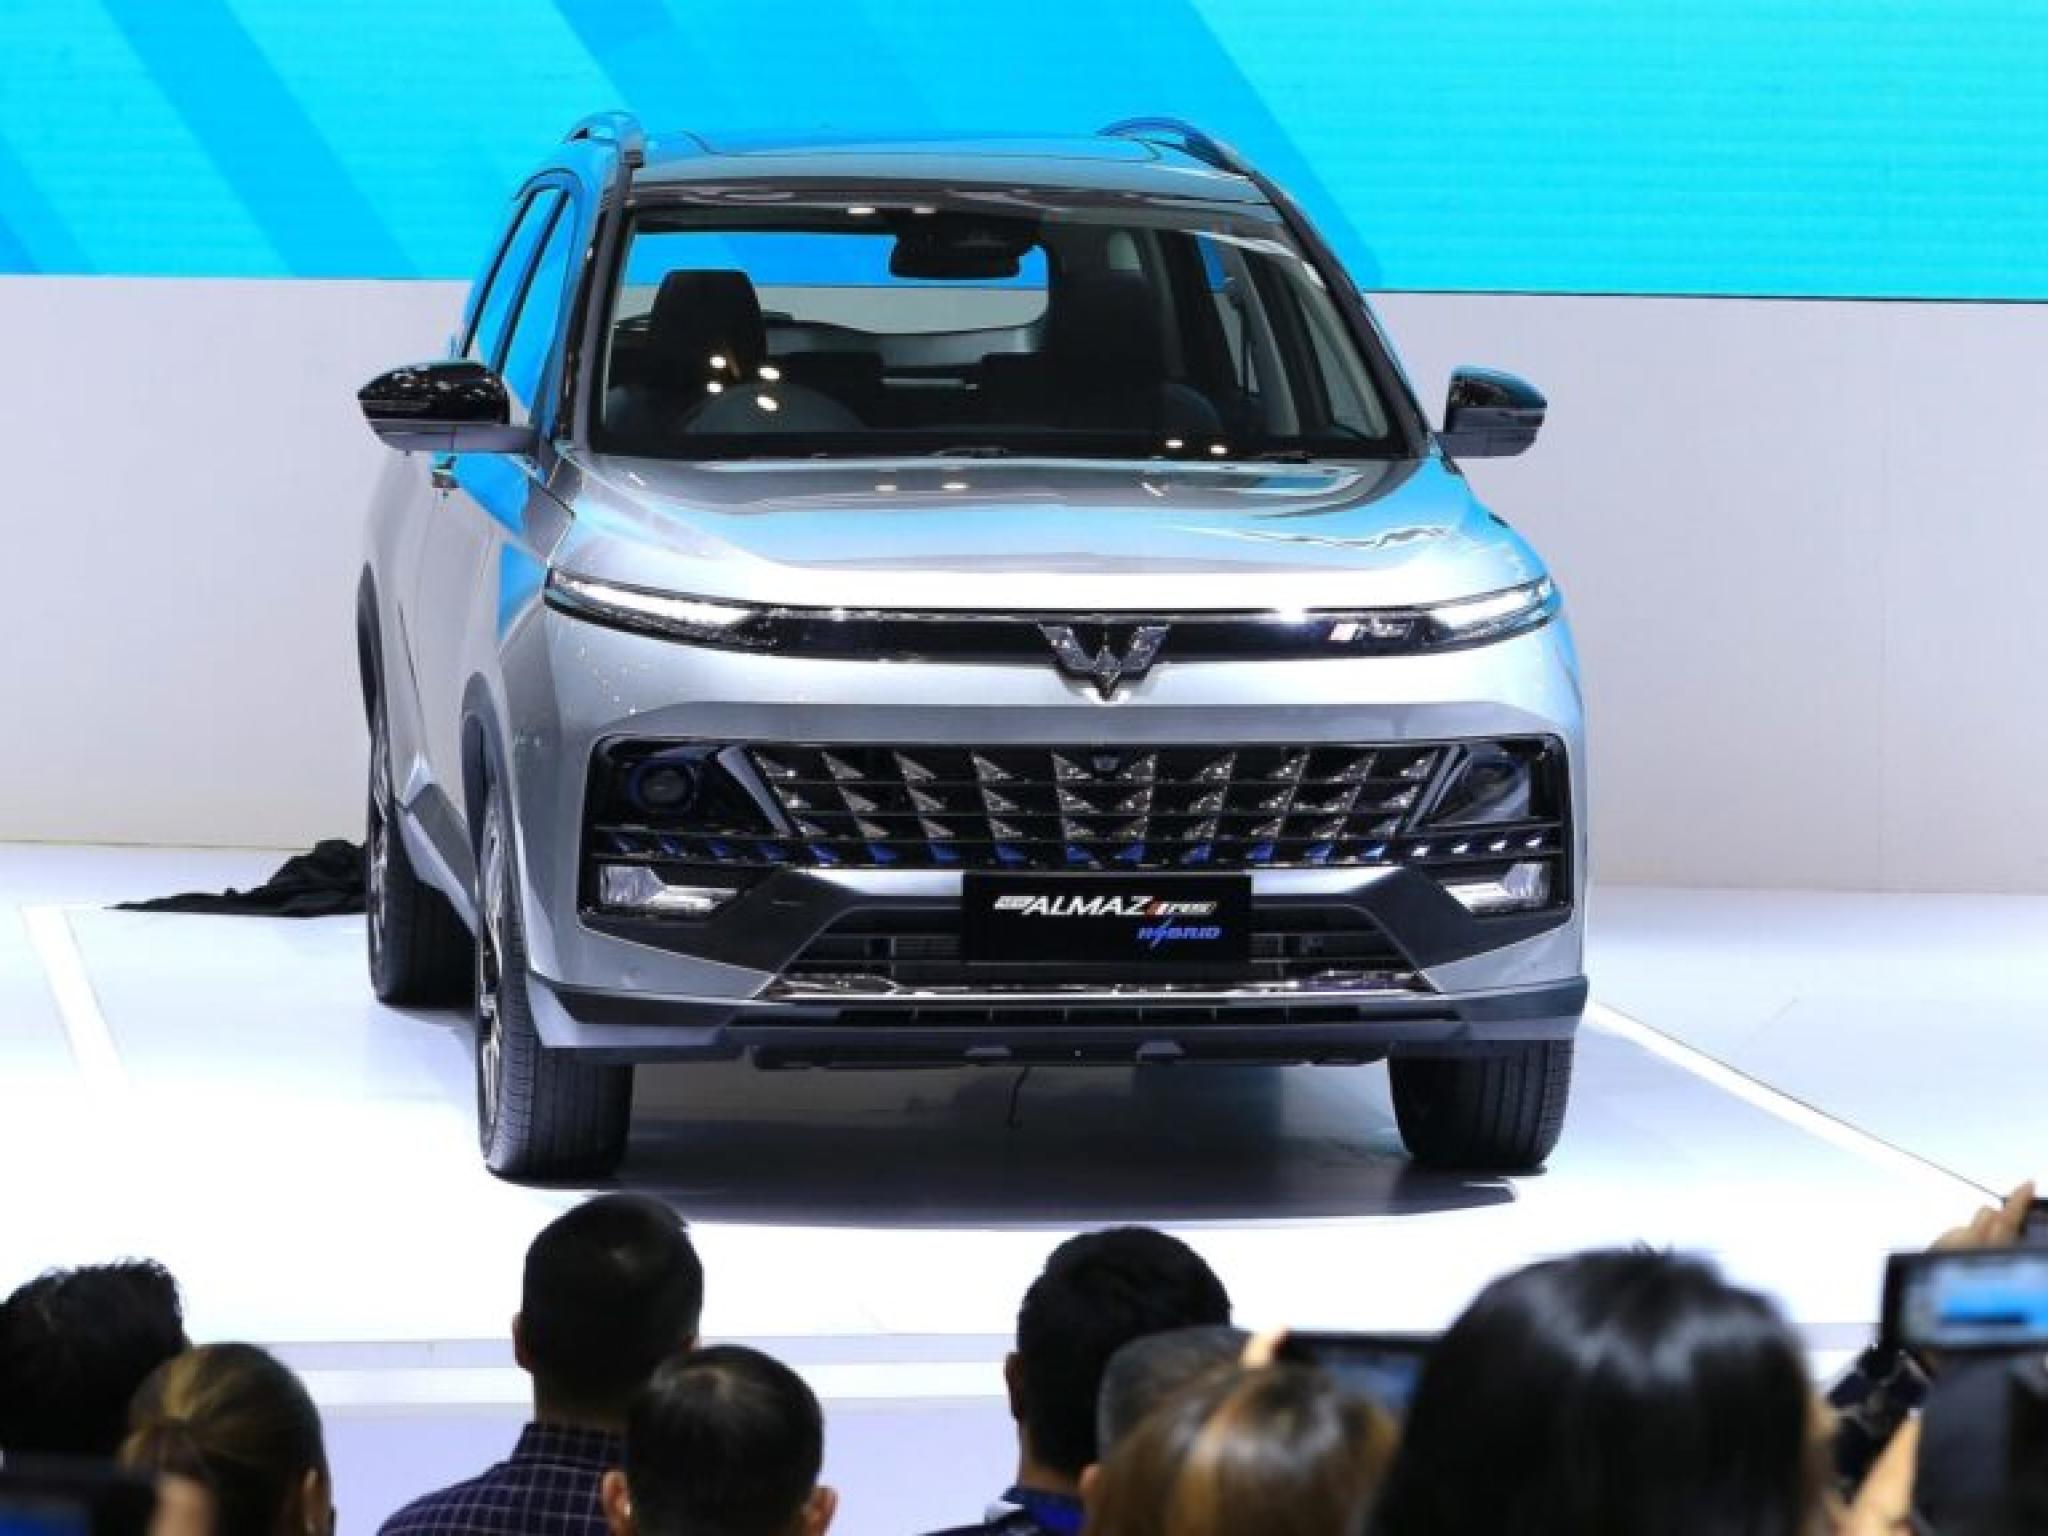  chinese-automaker-saic-eyeing-layoffs-at-joint-ventures-with-gm-volkswagen-report 